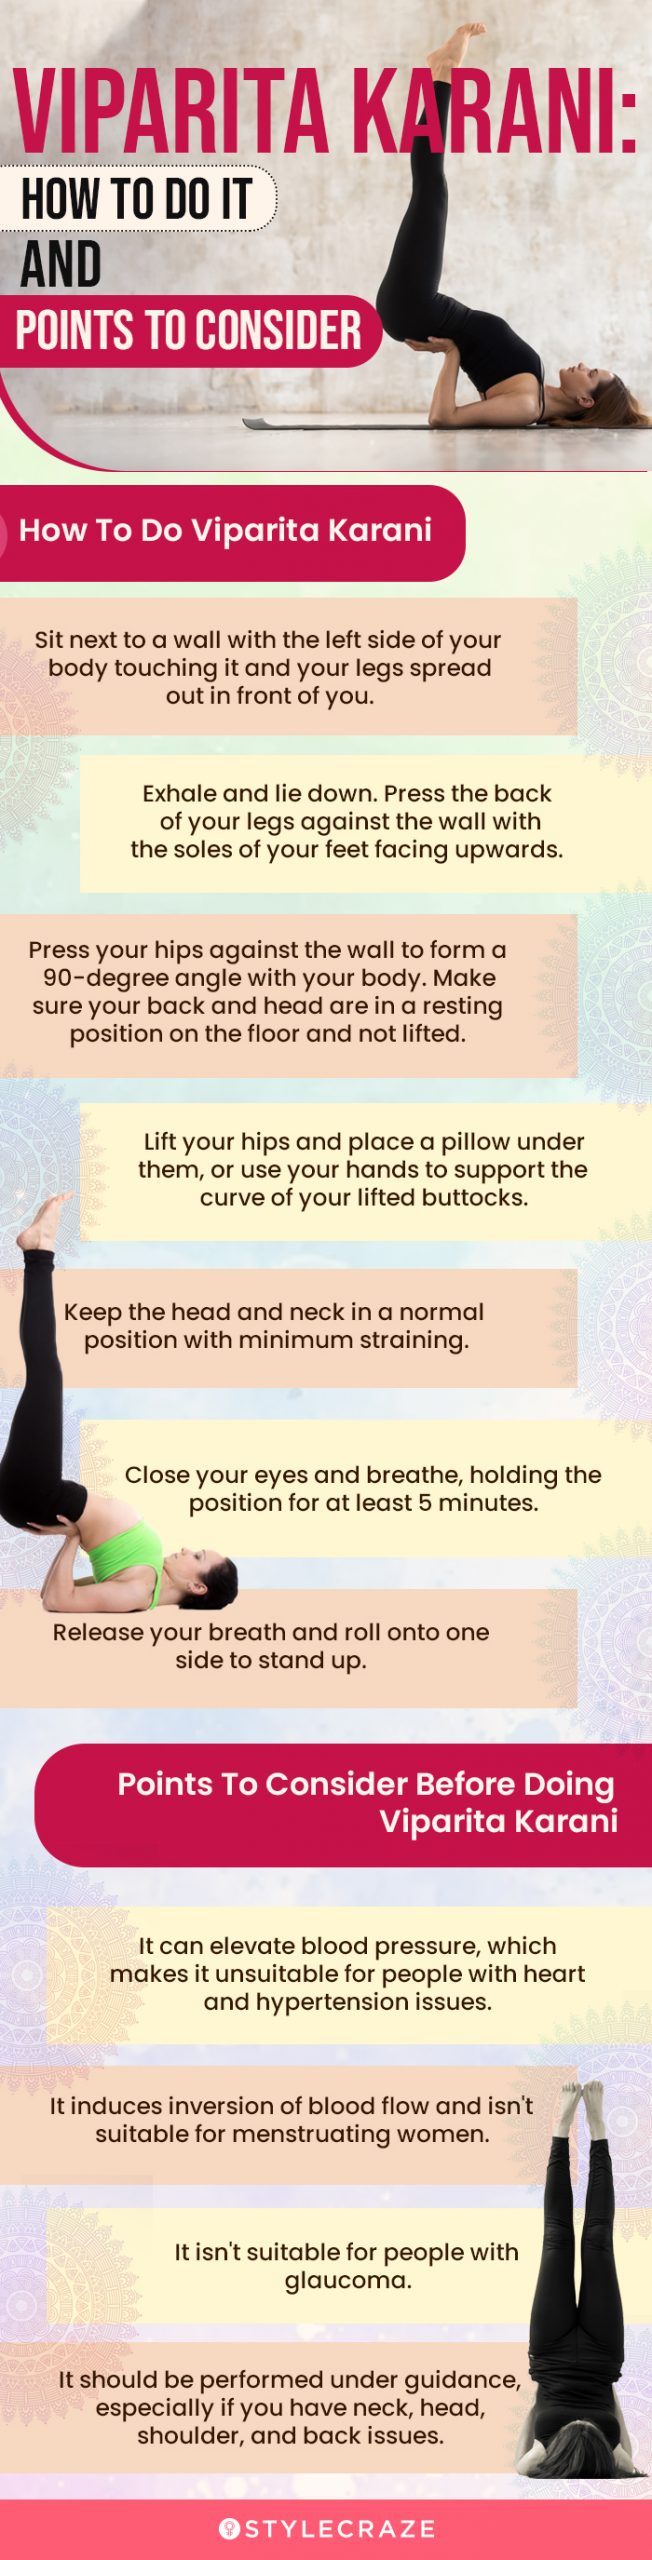 how to do the viparita karani and what are its benefits (infographic)